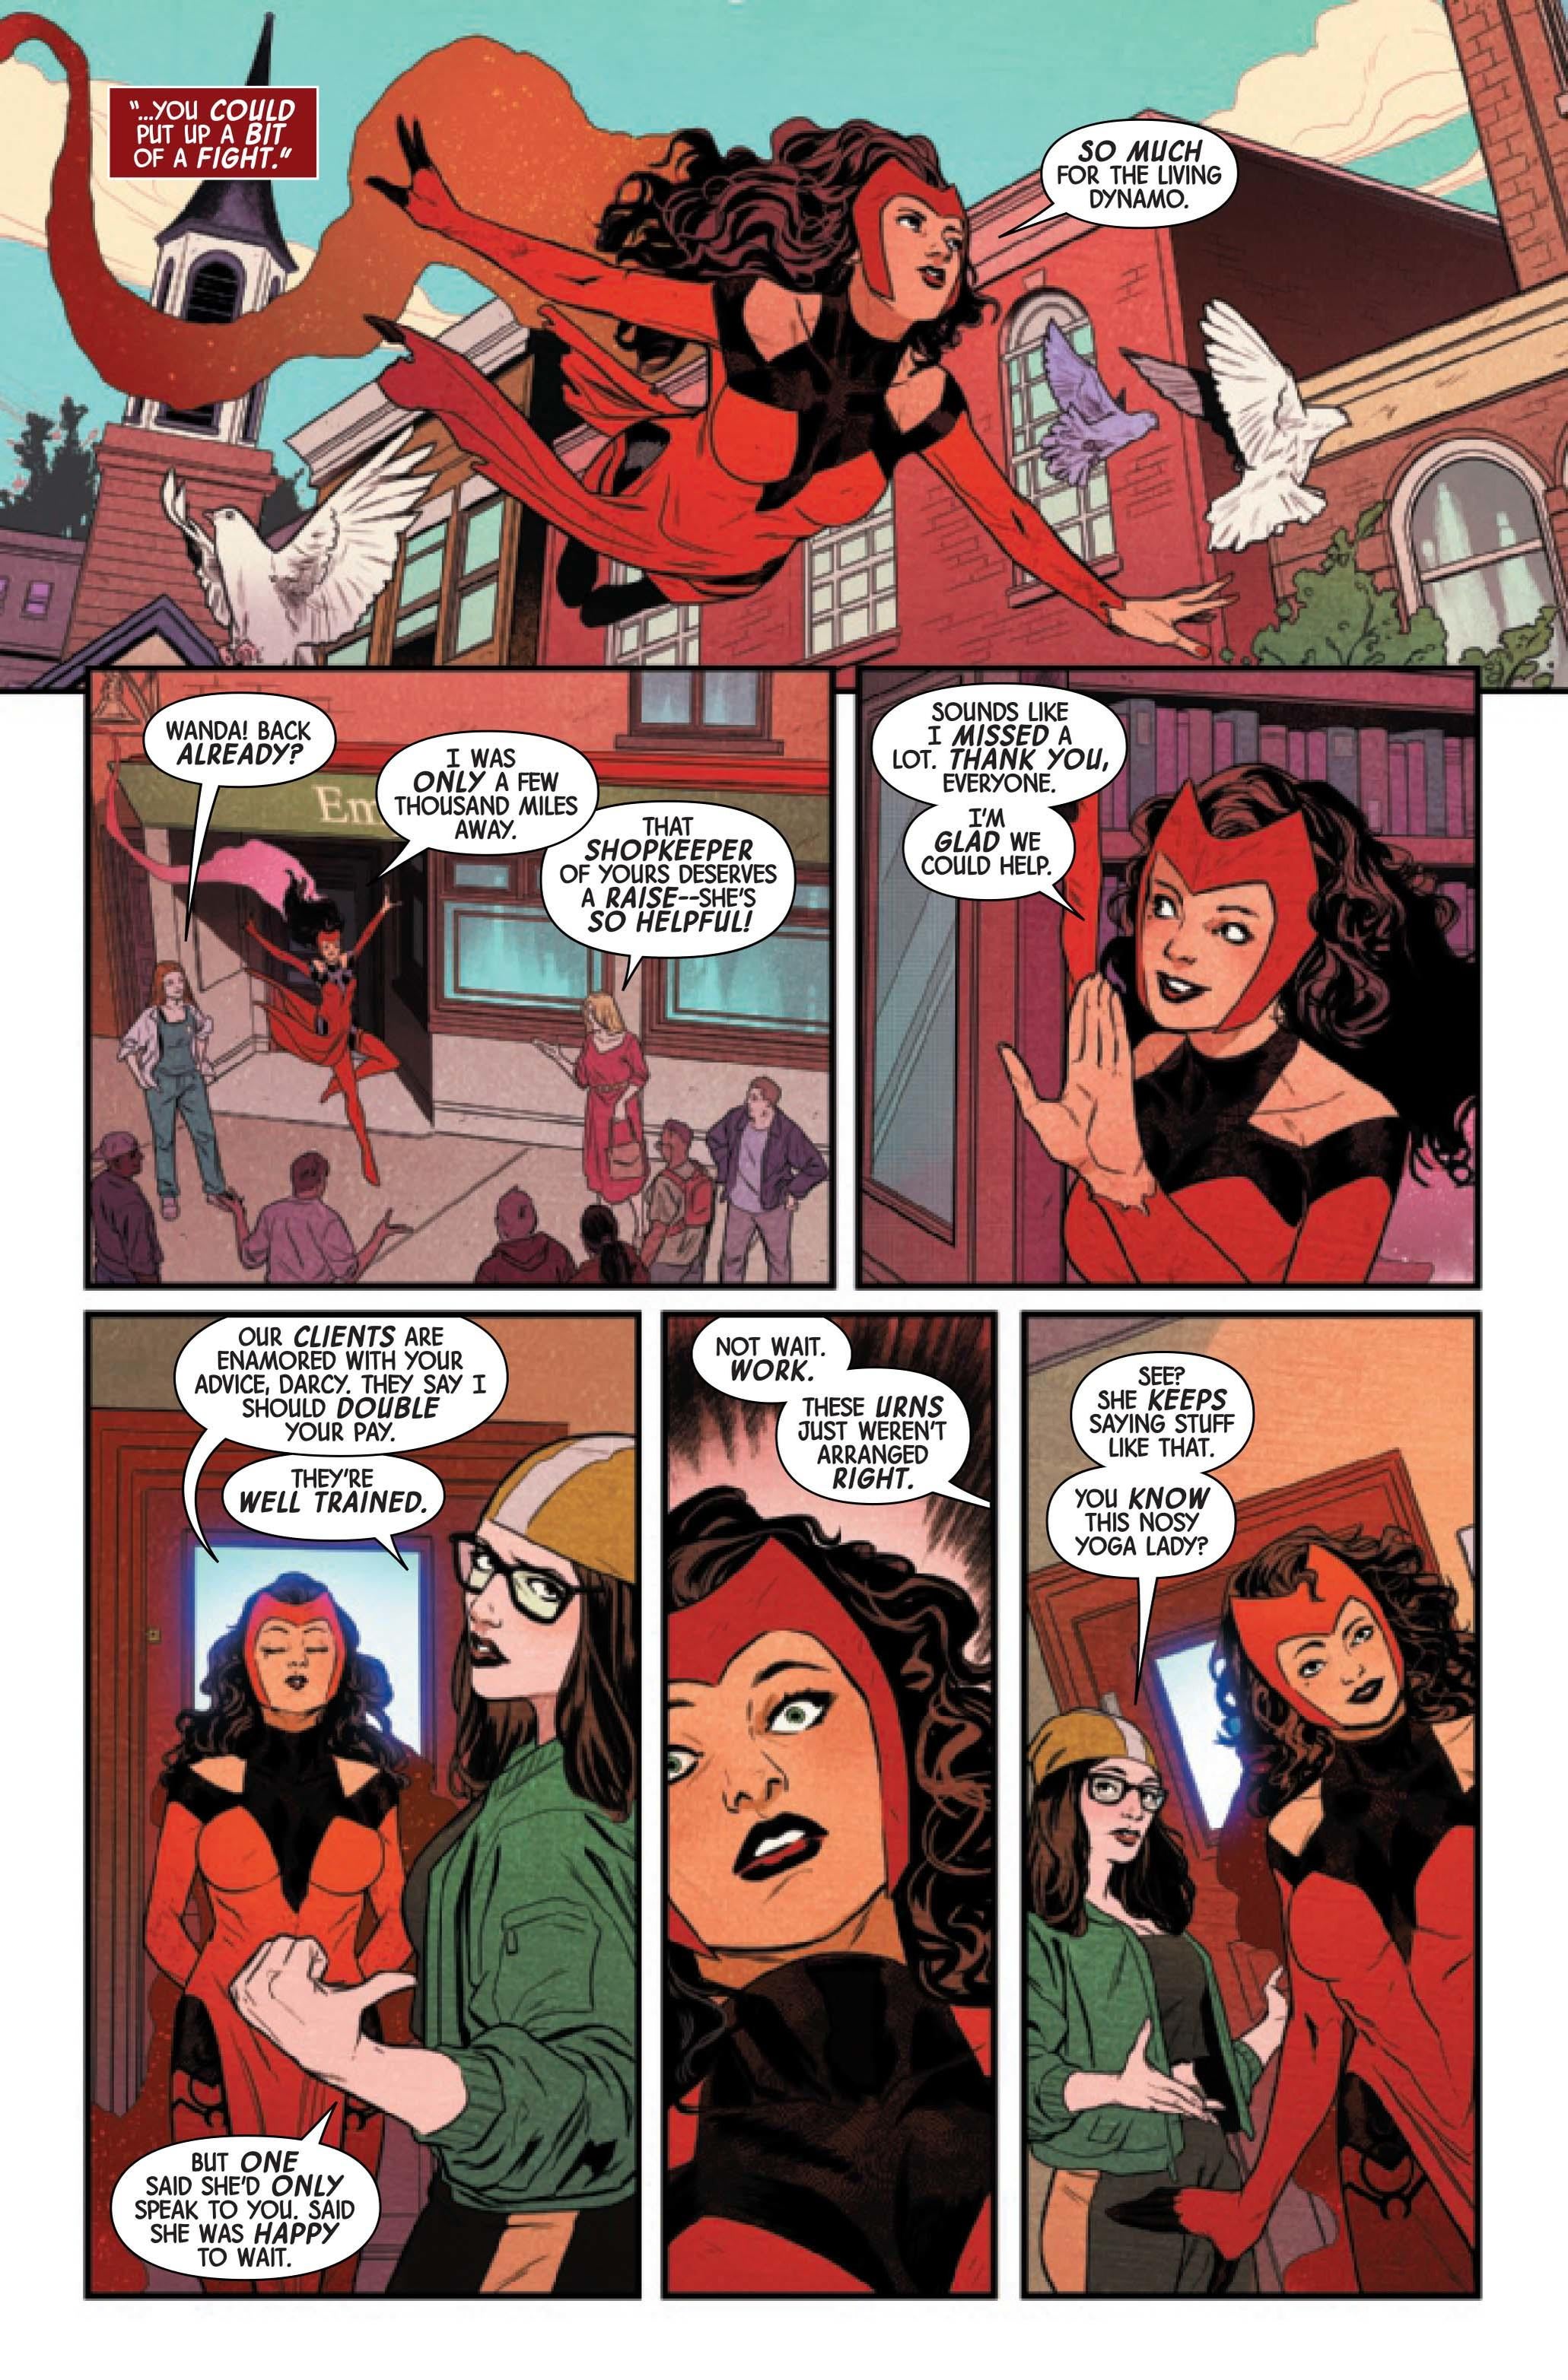 Scarlet Witch Annual 1 Rod Reis Spoiler Variant